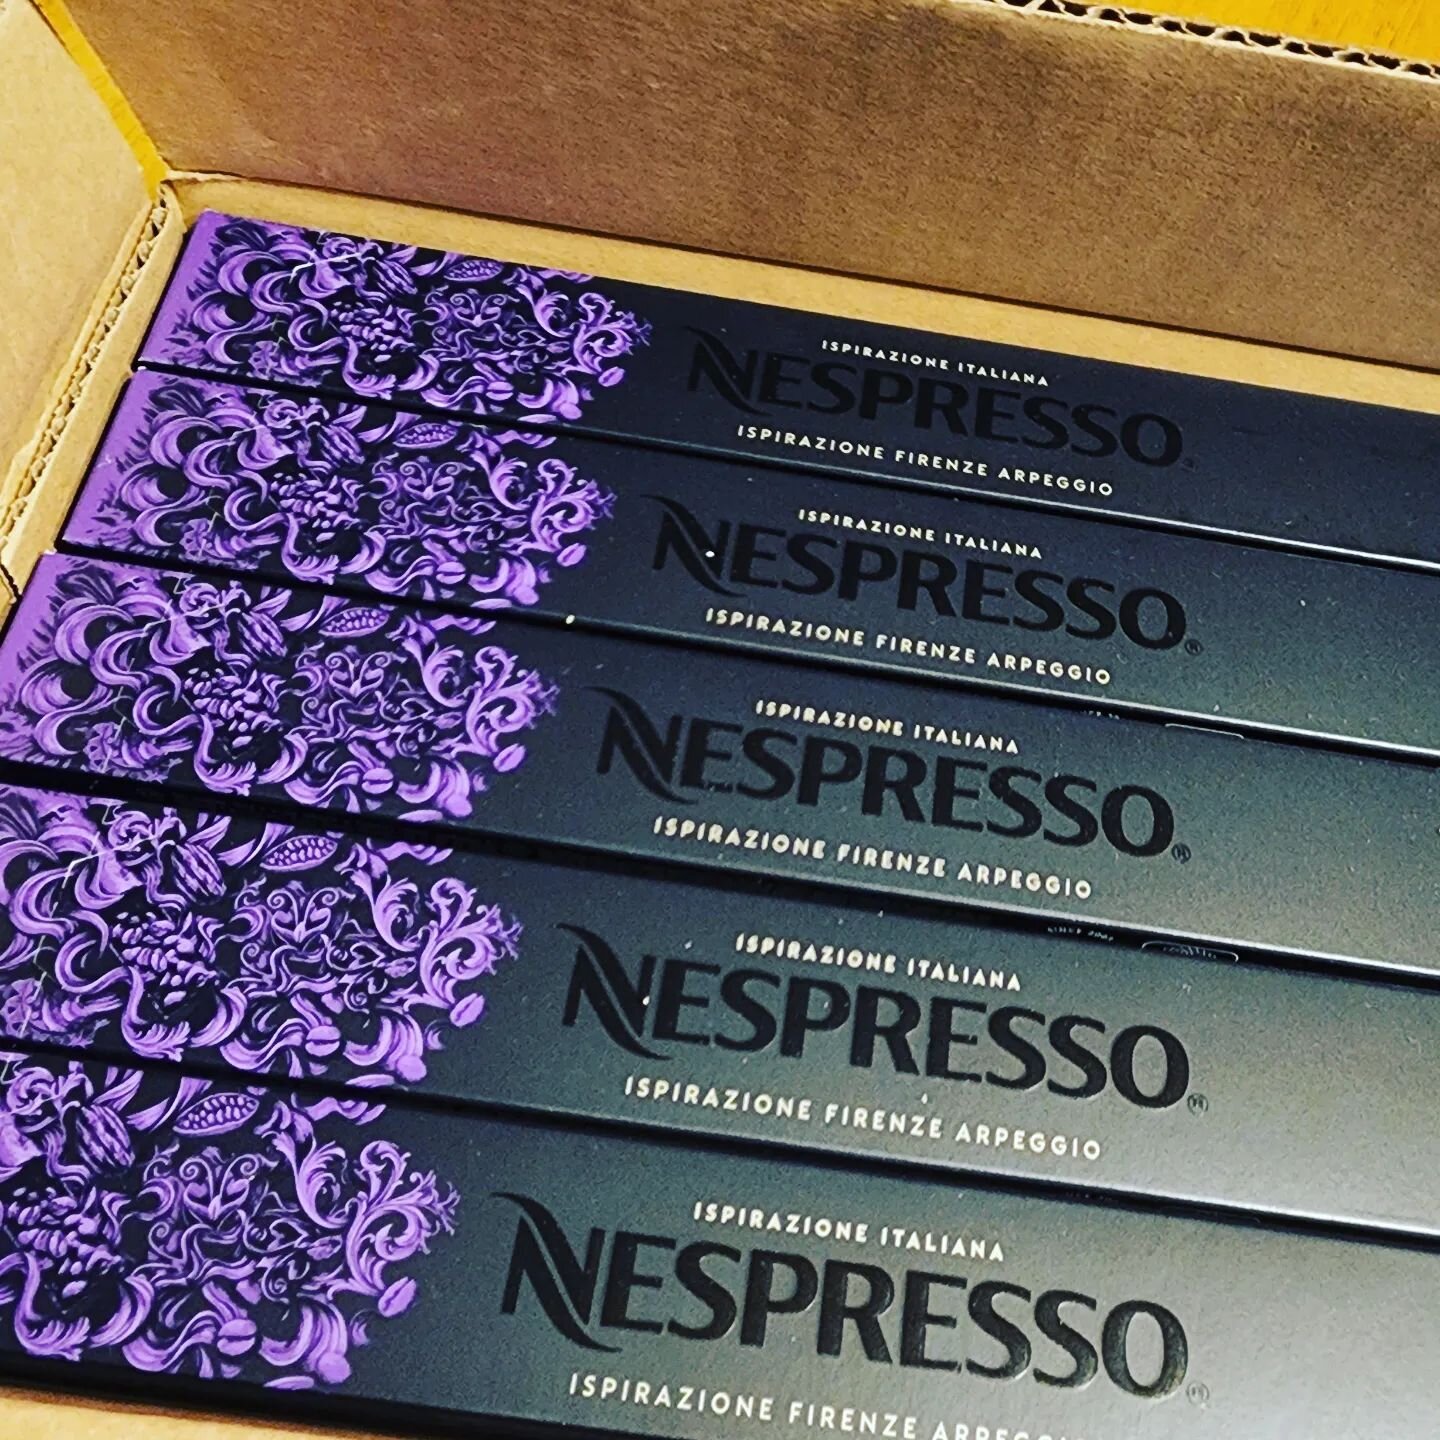 Can anyone use these pods?  I have a nespresso,  but the verturo line.  I ordered pods and they sent the wrong ones, apparently they can't be returned!  I do t want anything for them, just don't want them to be wasted!